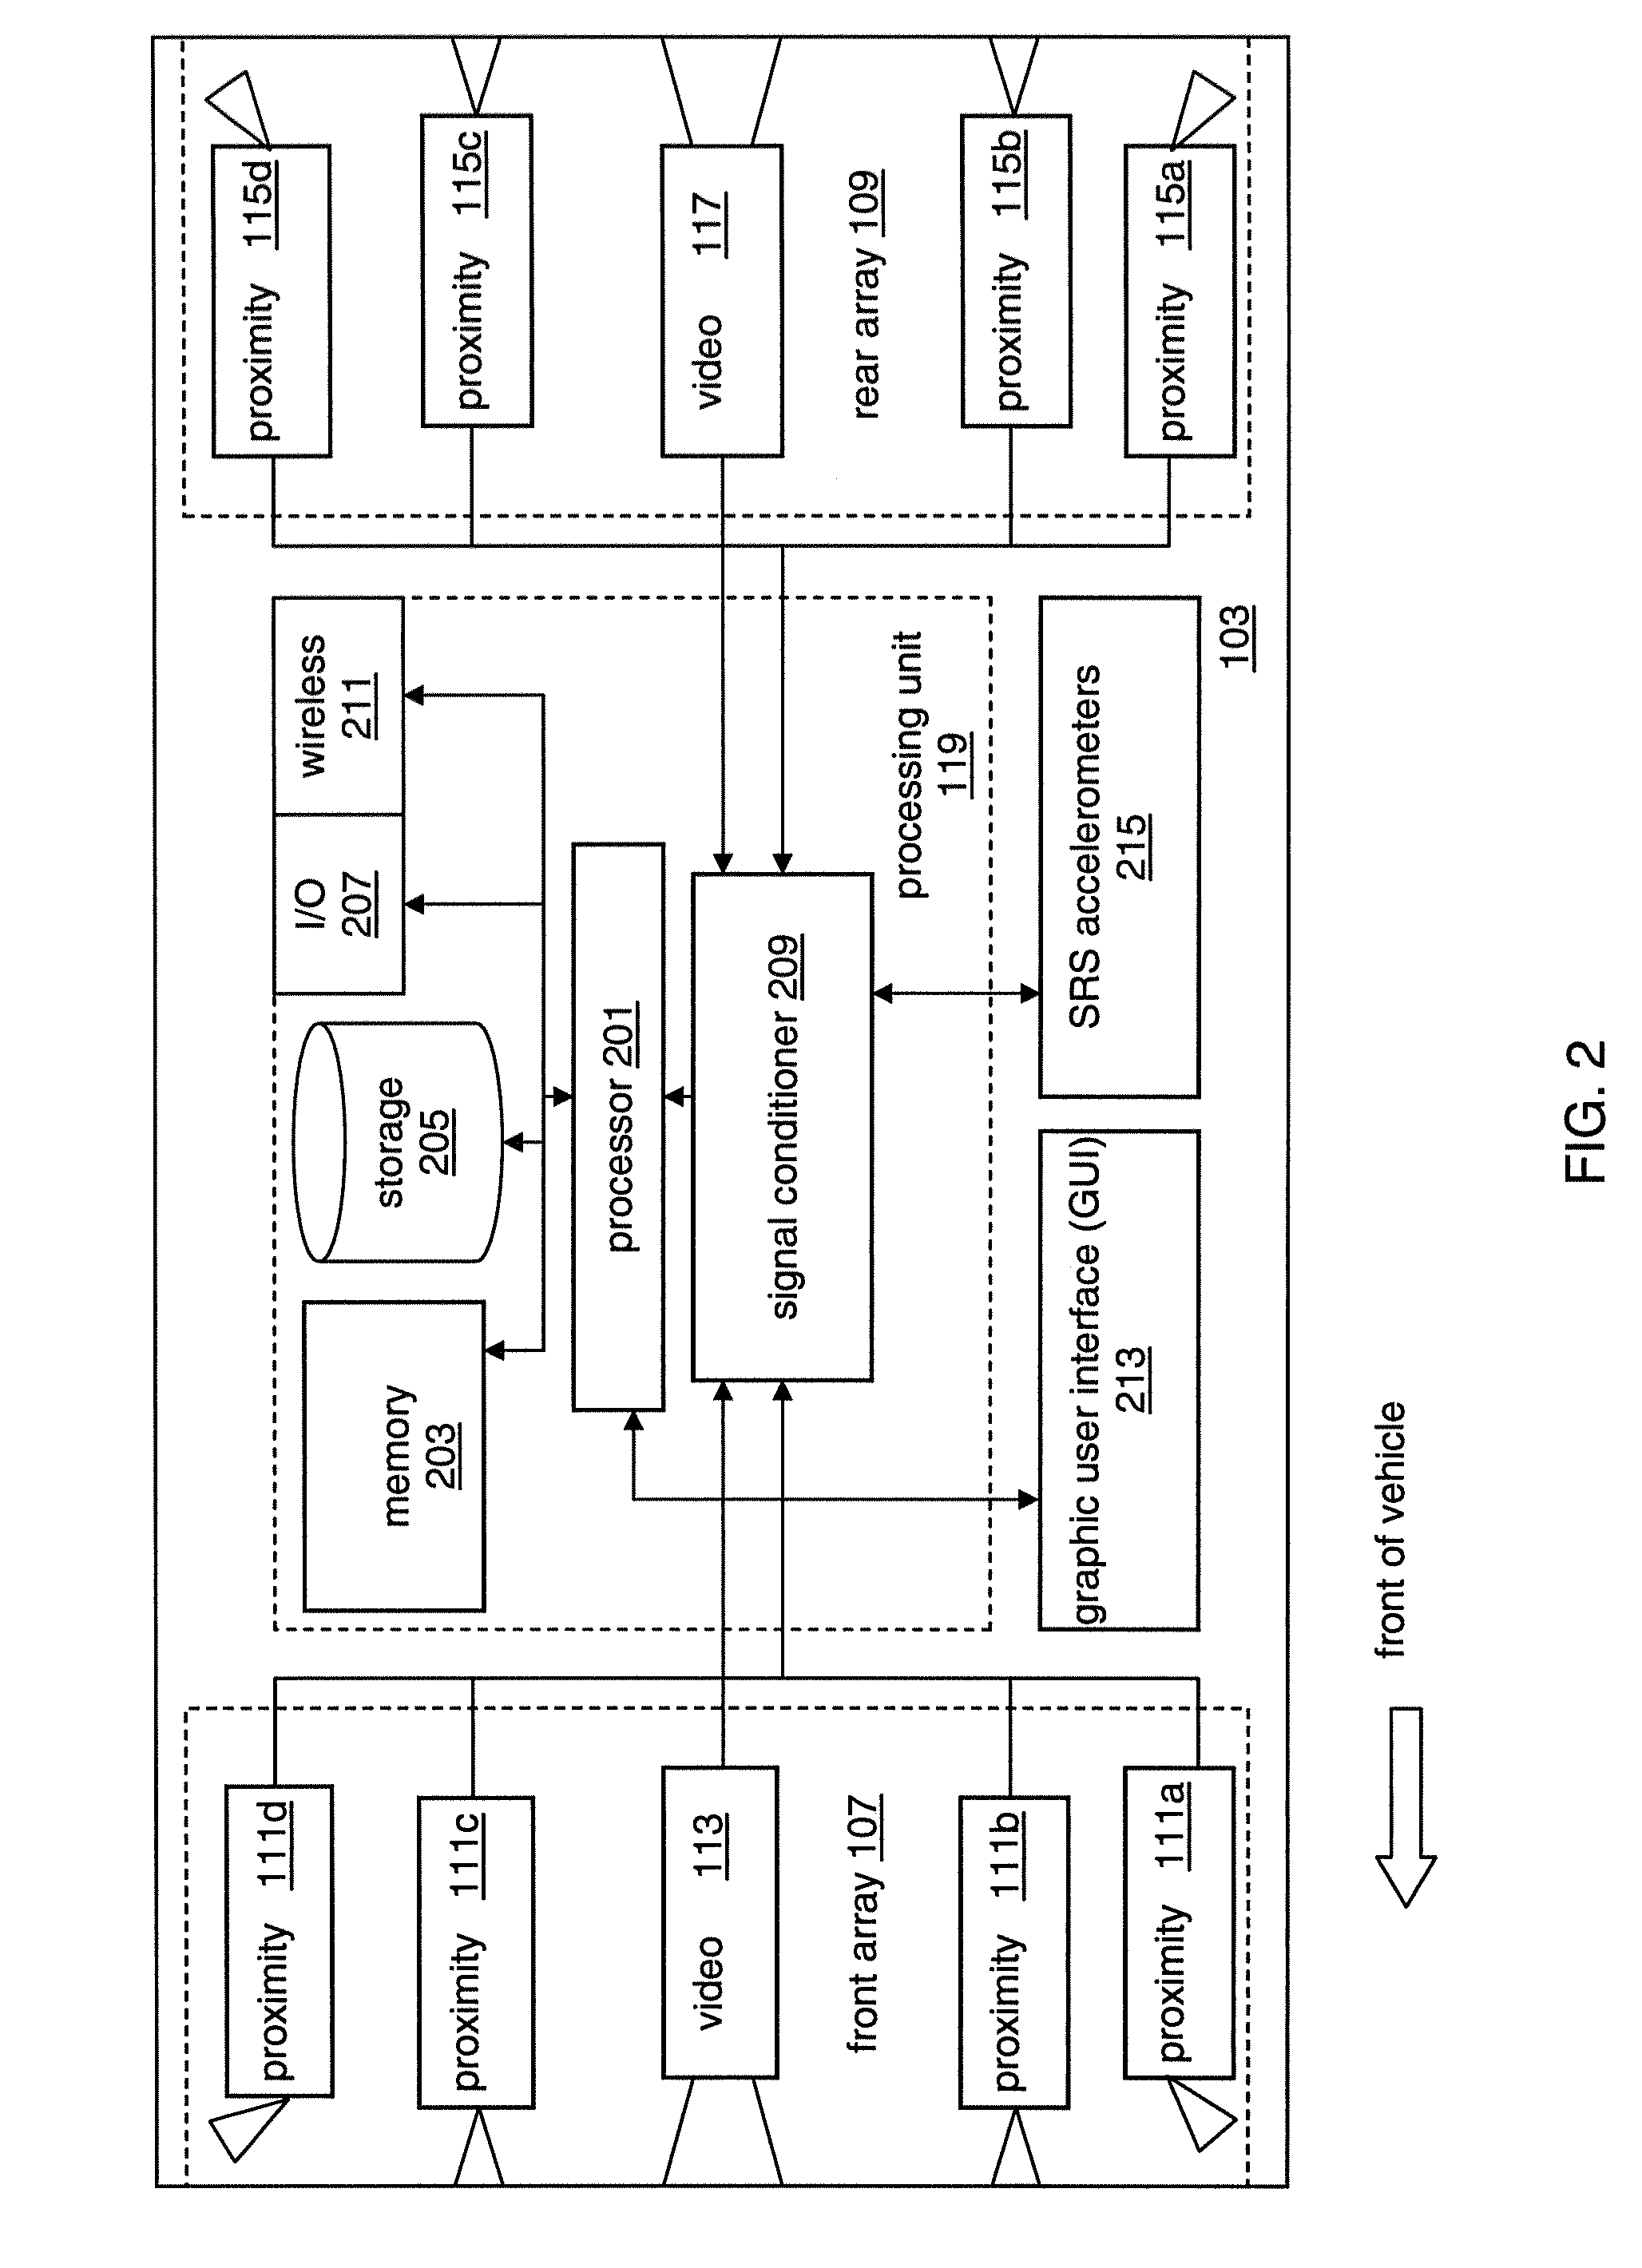 Hit and Run Prevention and Documentation System for Vehicles